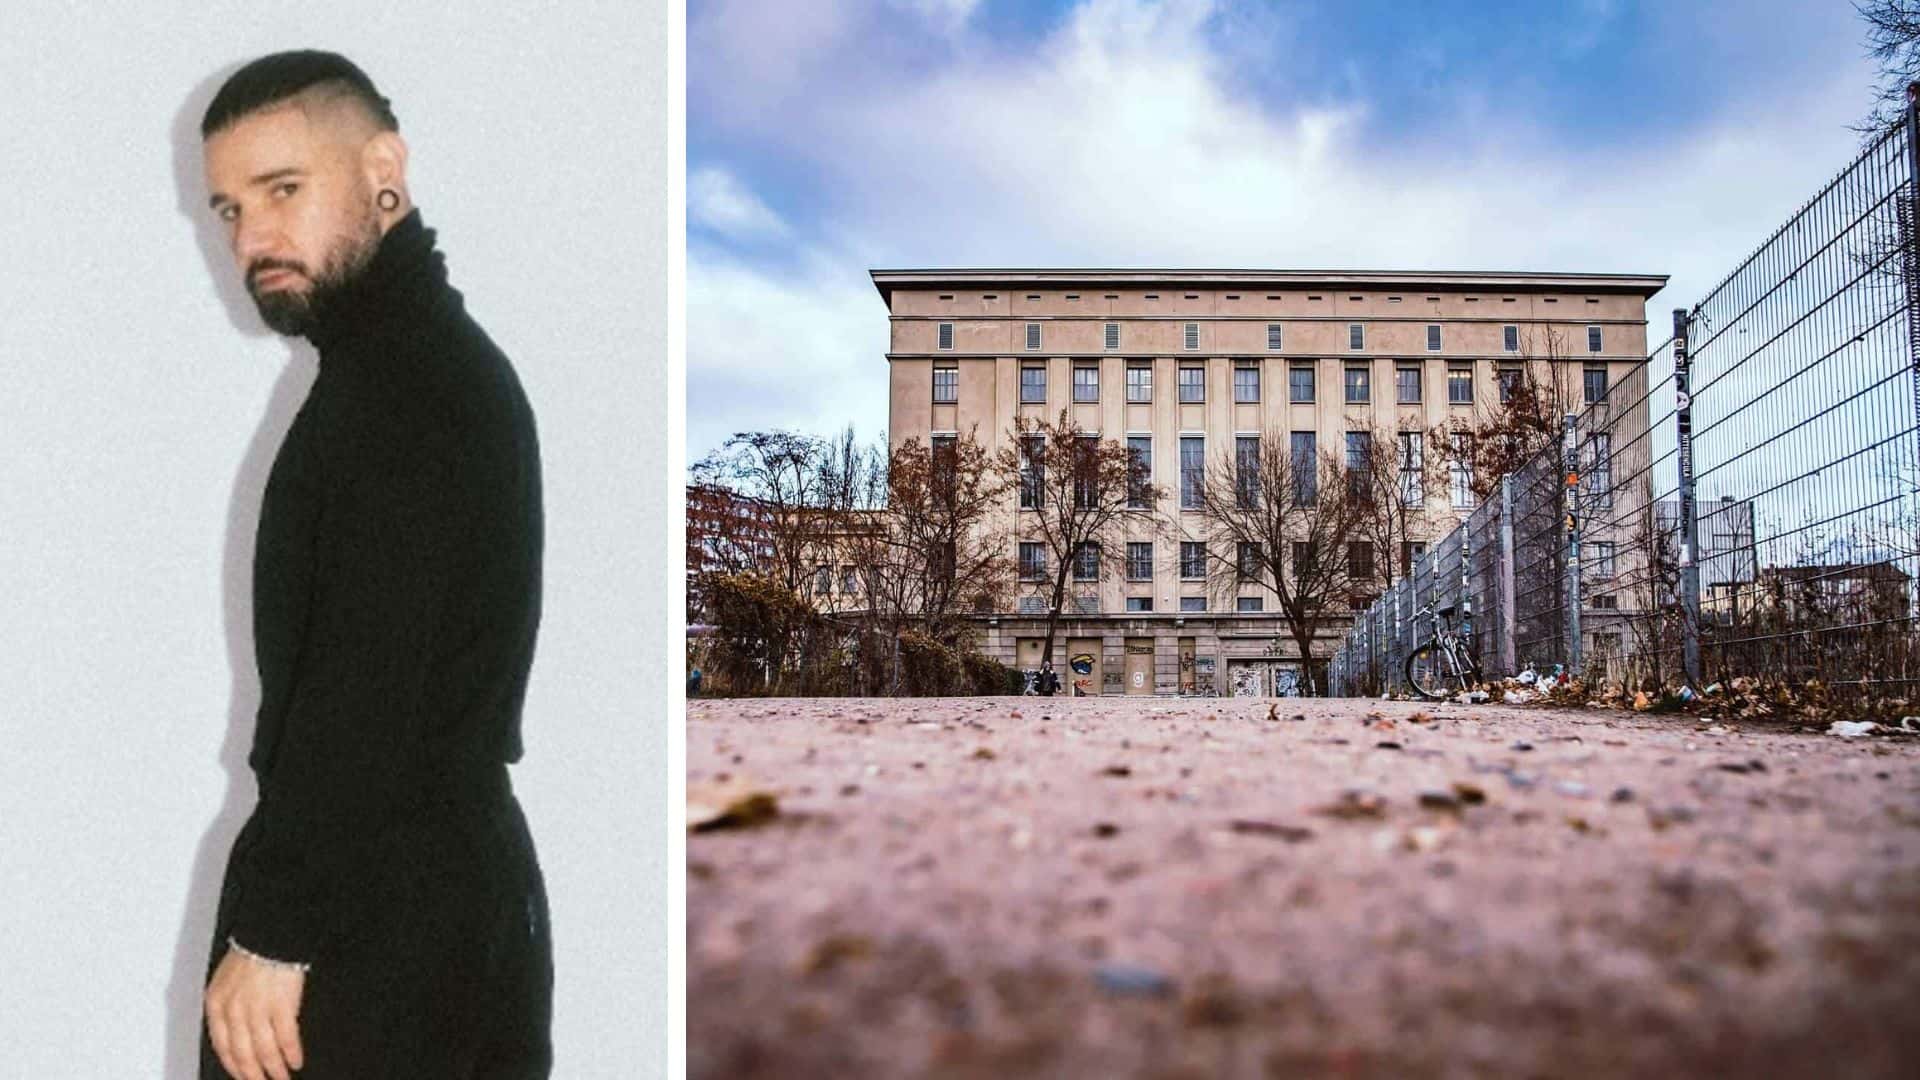 Skrillex is set to perform at Berghain for the first time